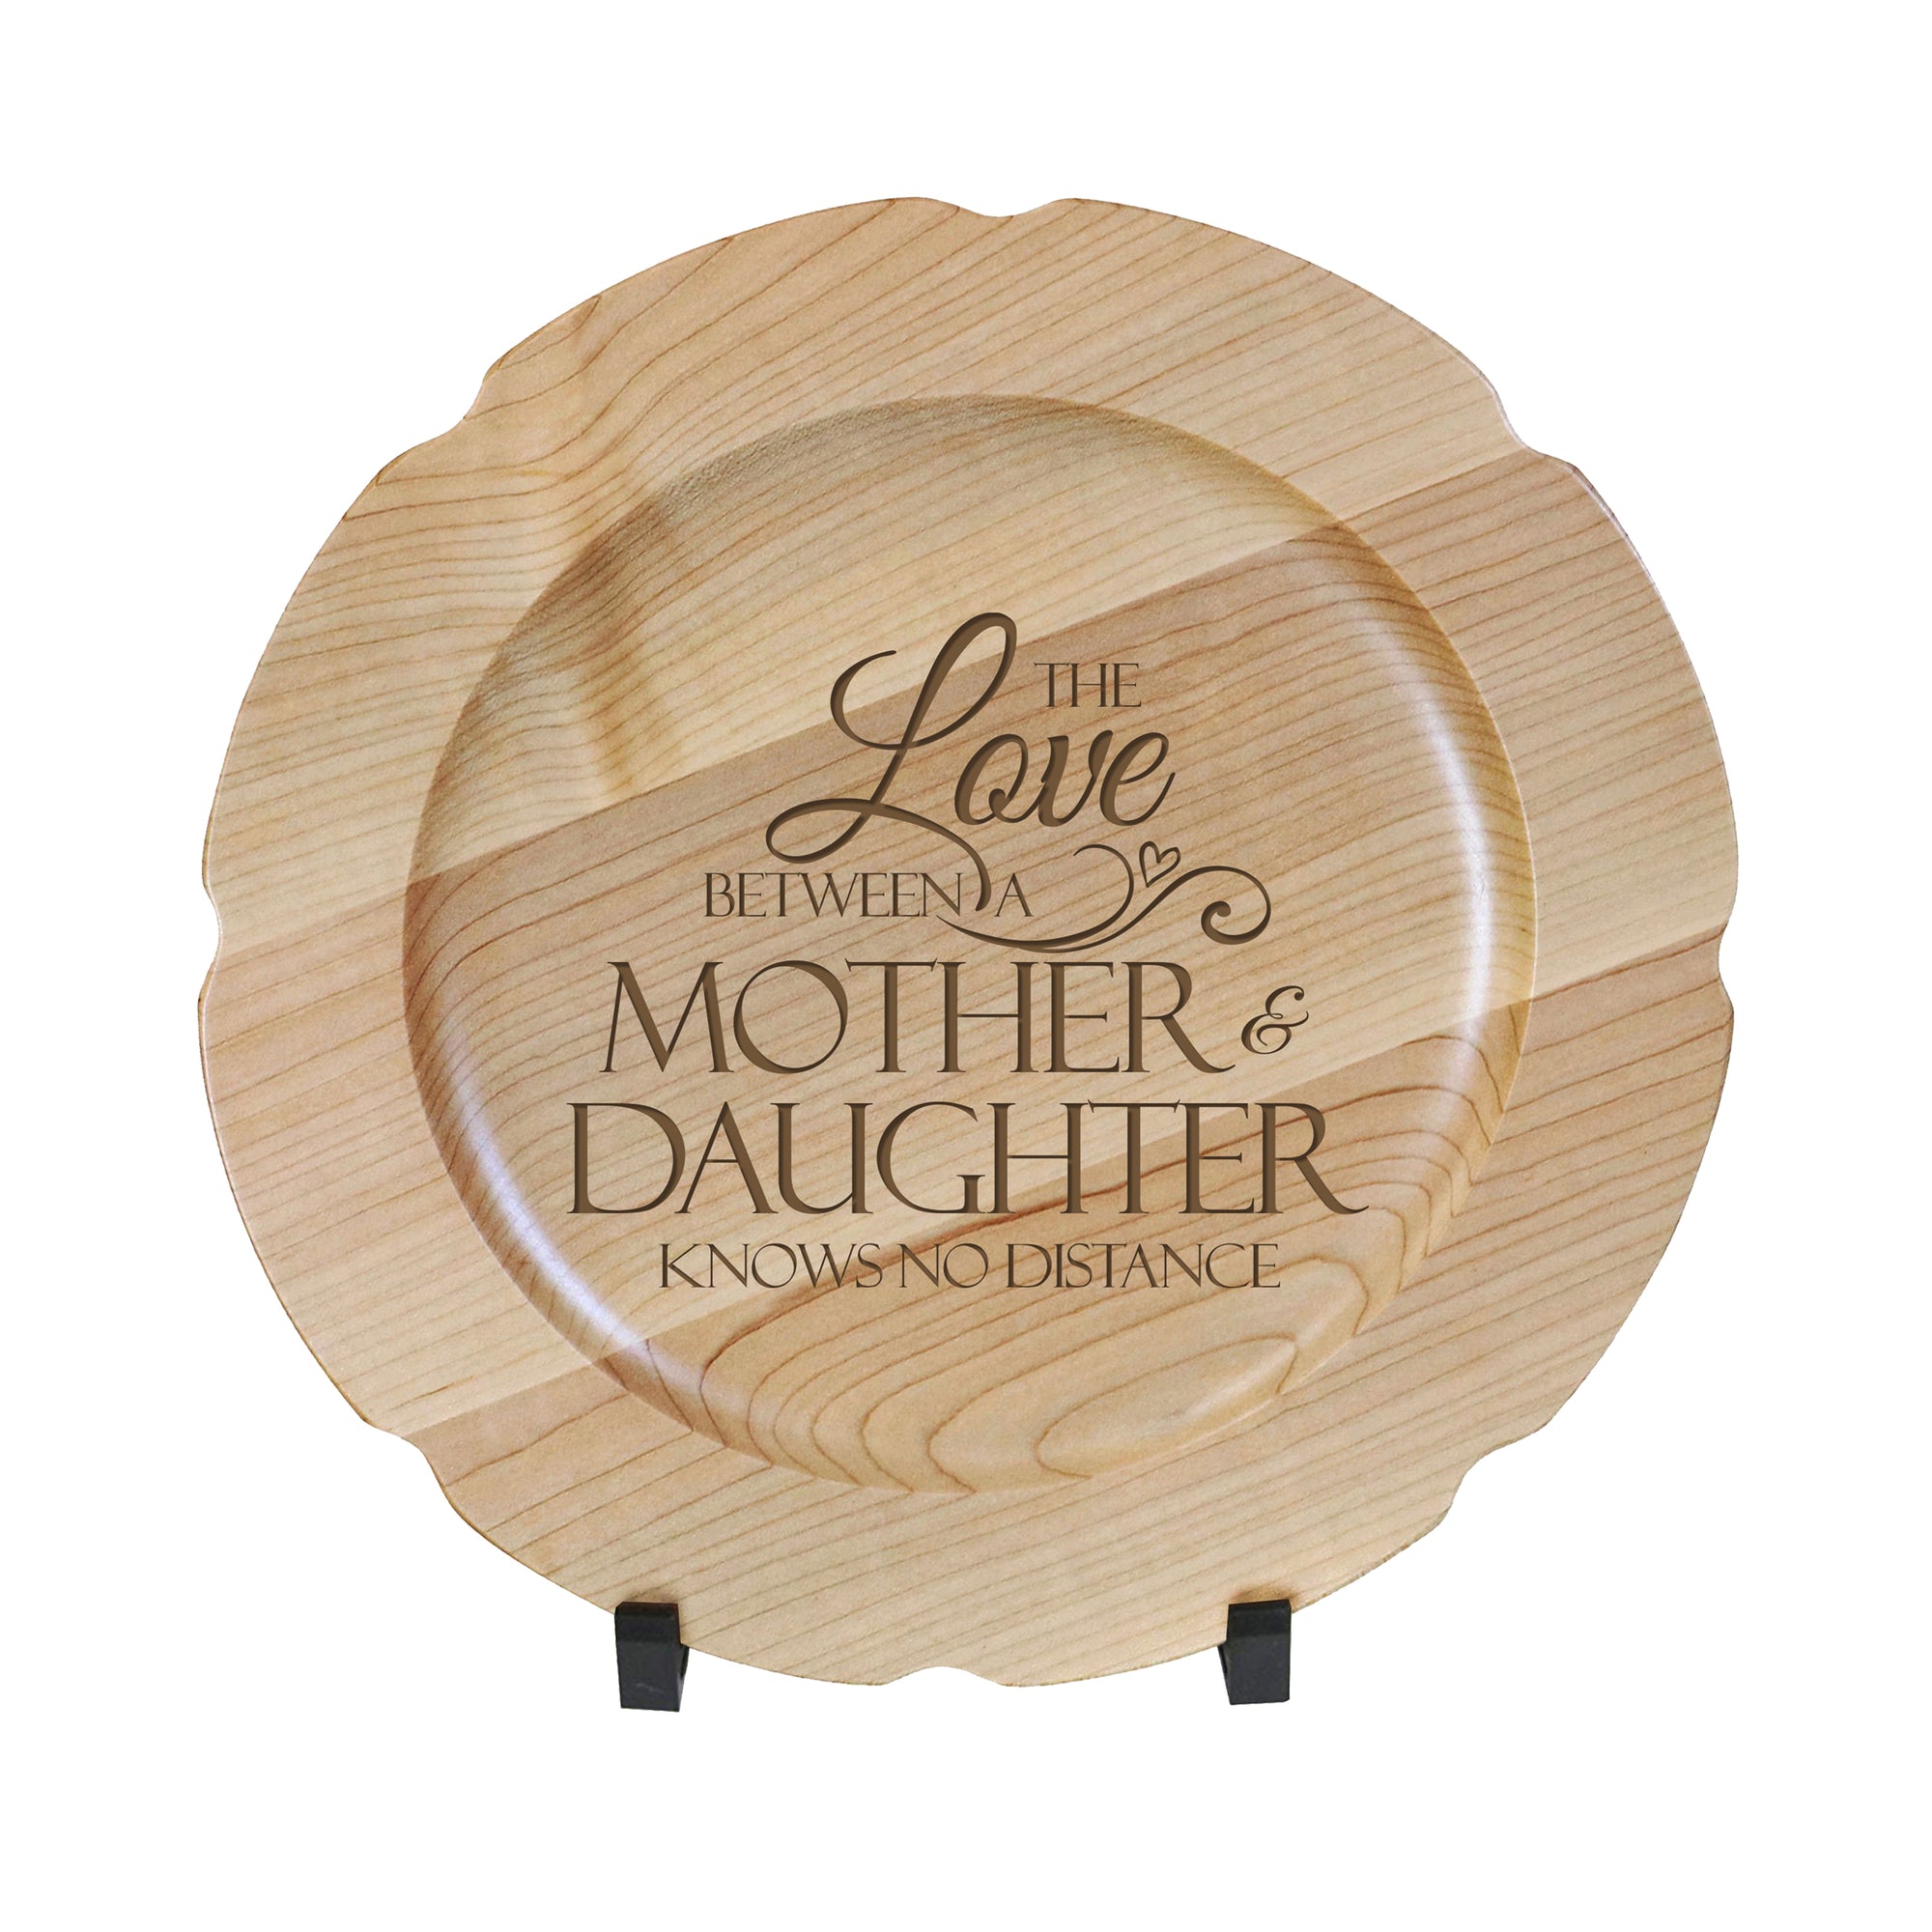 LifeSong Milestones Wooden Decorative Plate Family Keepsake 12in Mother and Daughter Housewarming Mother’s Day Gift Home Wall Decor Kitchen Keepsake